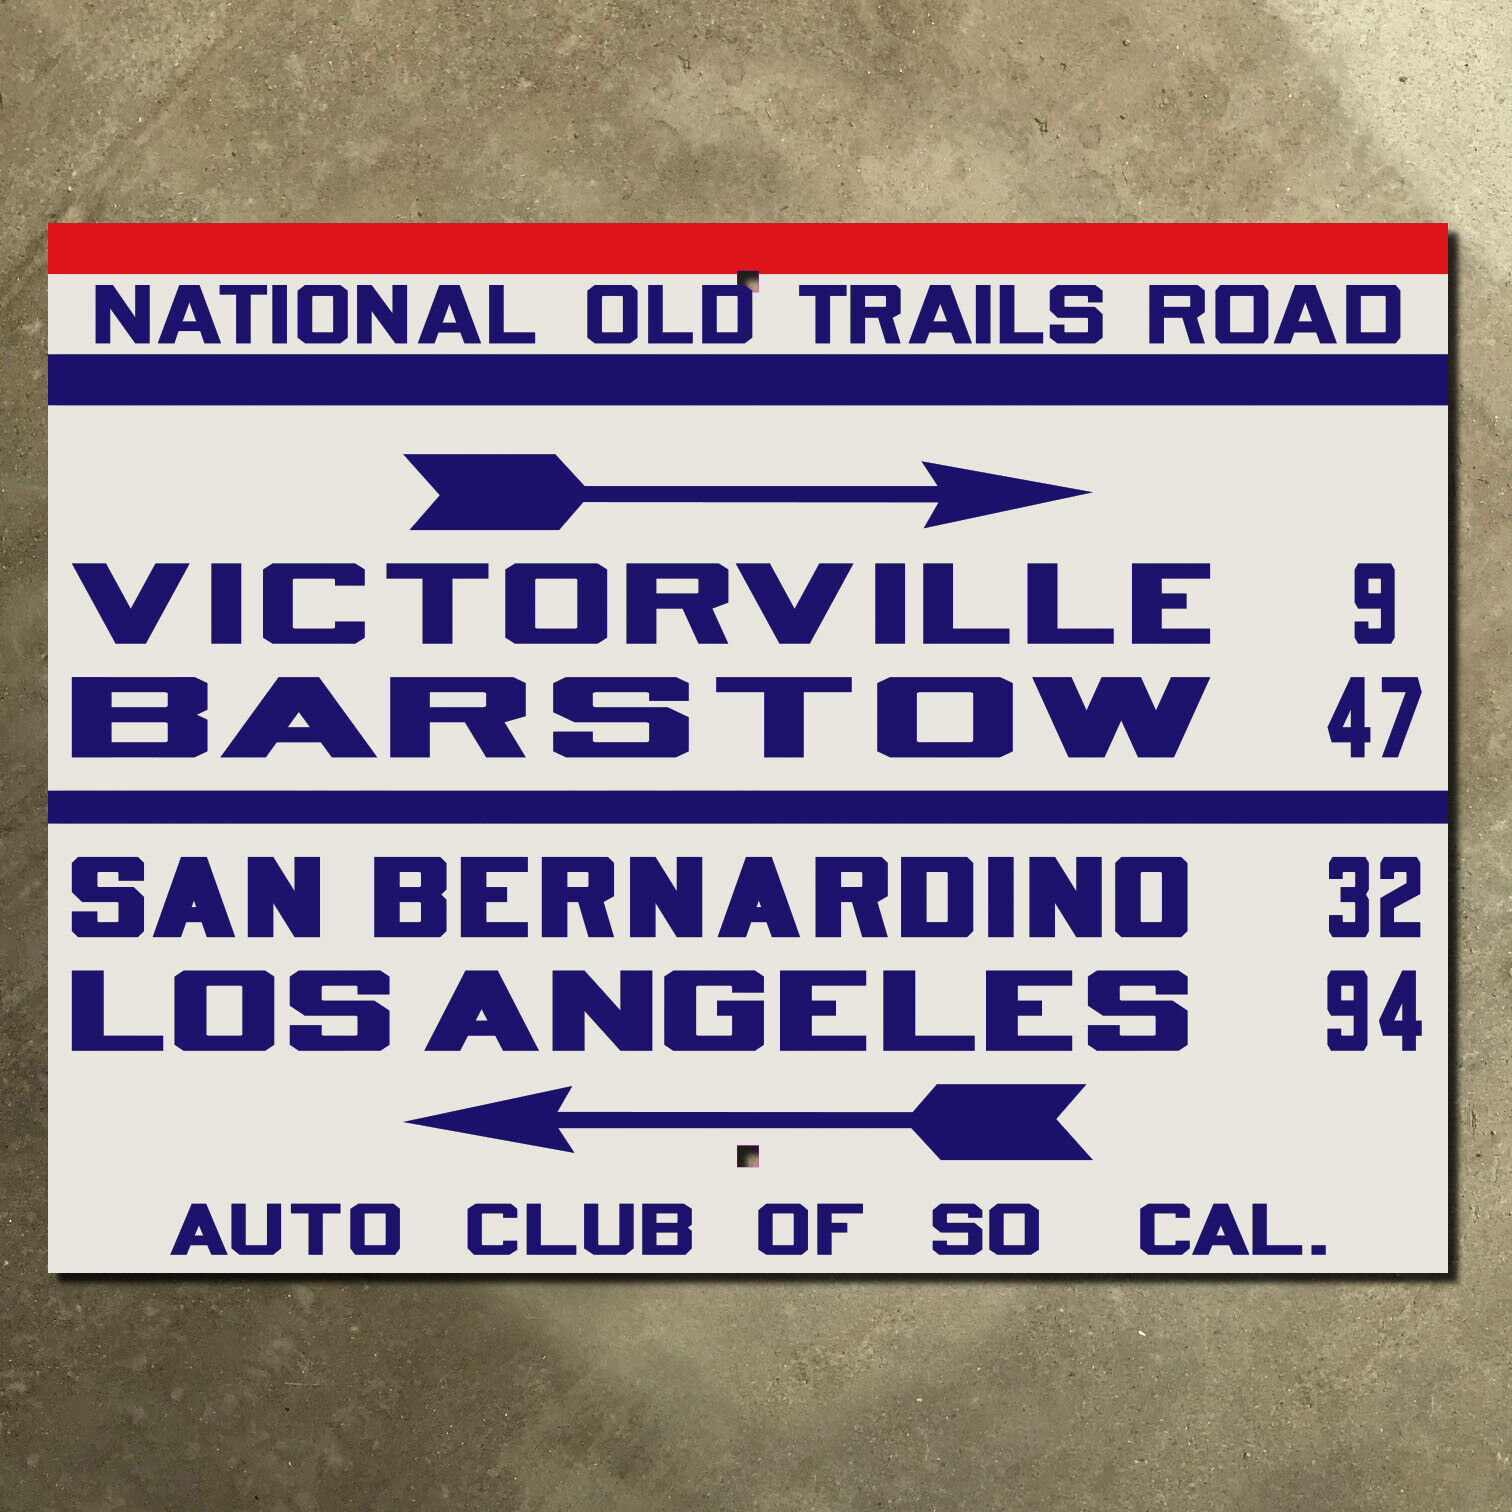 ACSC Victorville Barstow National Old Trails Road route 66 highway sign 24x18